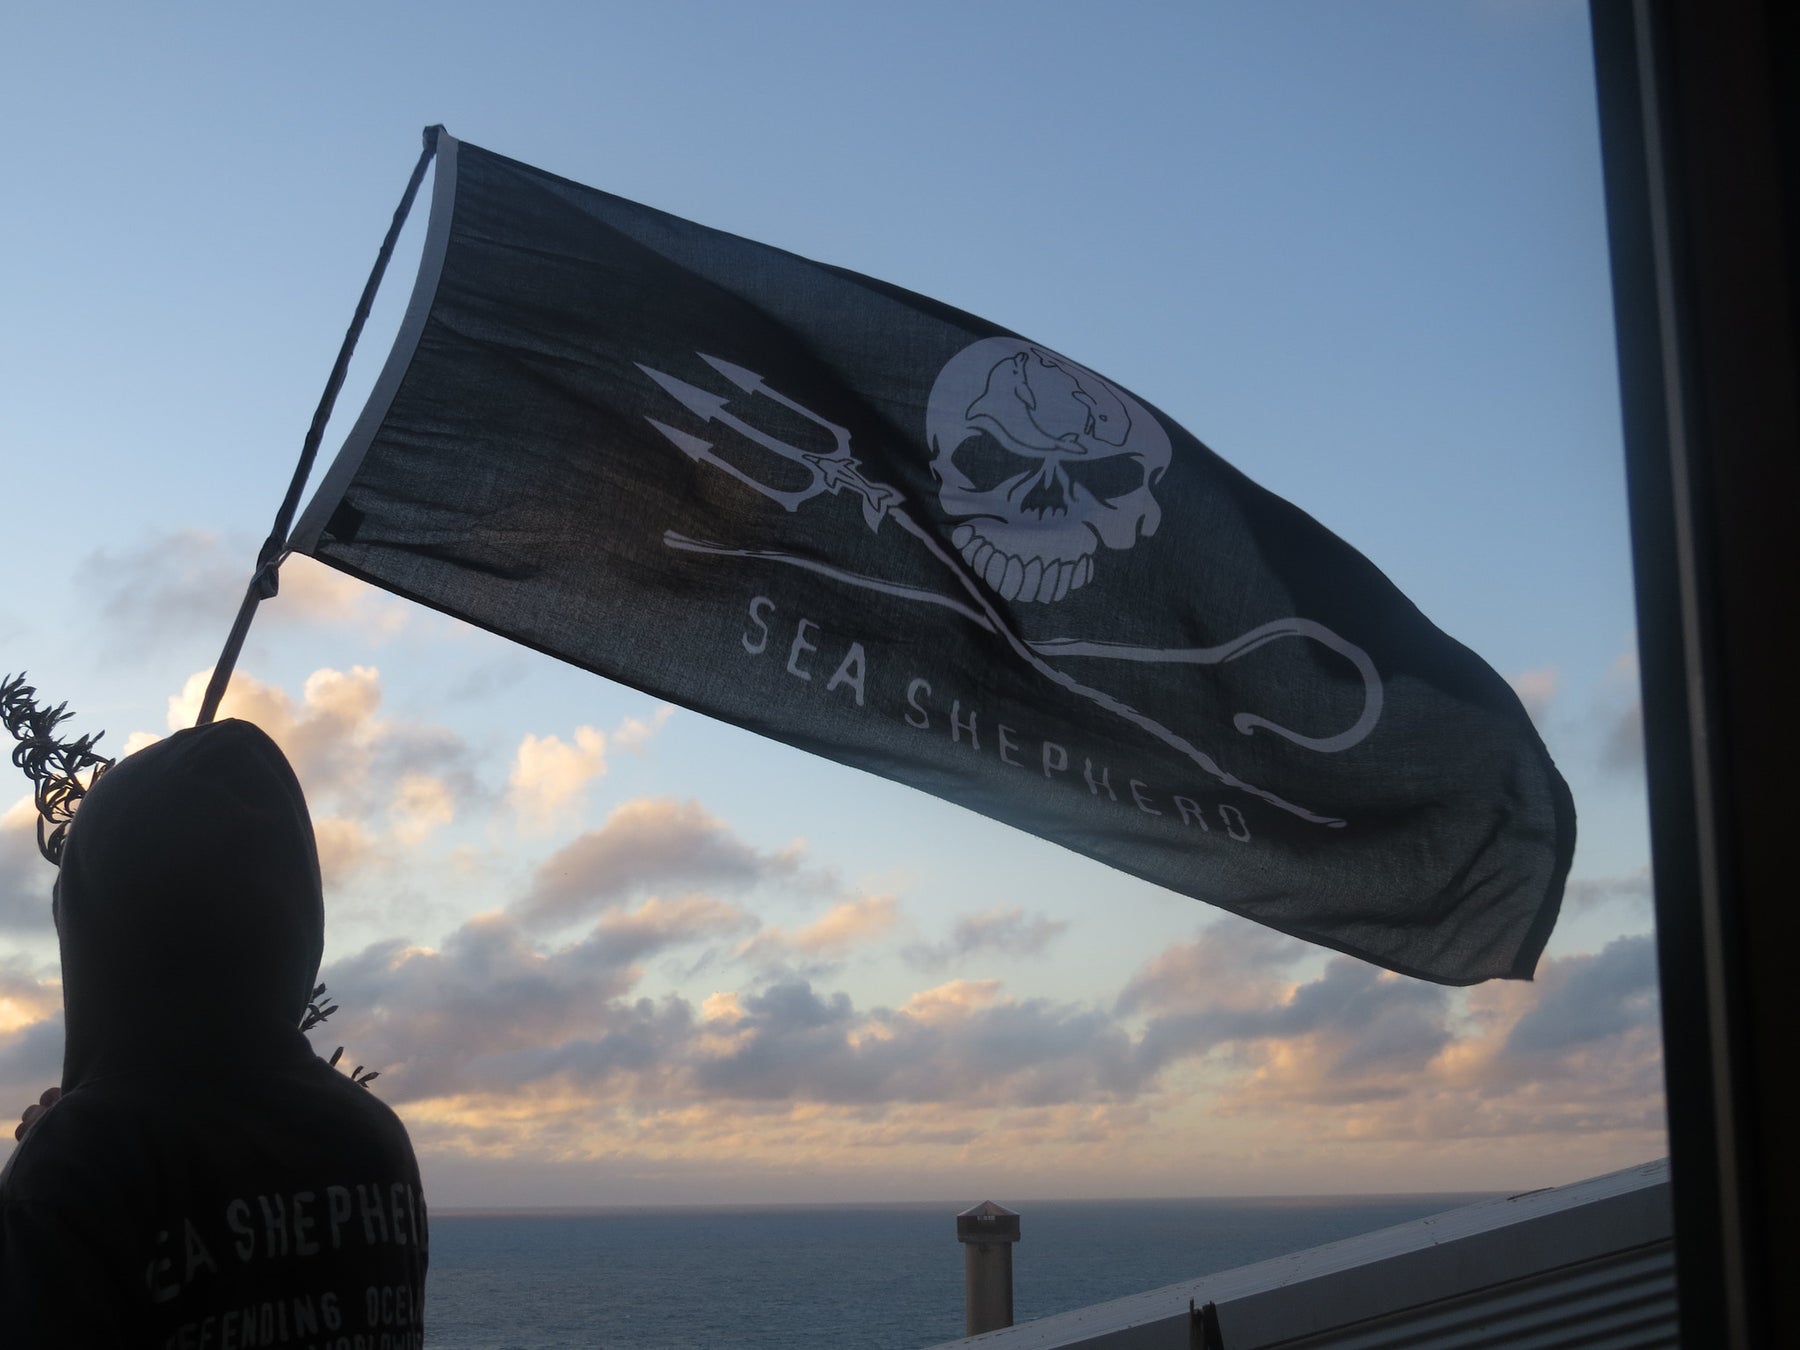 Sea Shepherd - Ever wonder about the significance of our Jolly Roger logo?  The Jolly Roger logo stands for the good pirates (Sea Shepherd) who pursue  the bad pirates (driftnetters, whalers, sealers